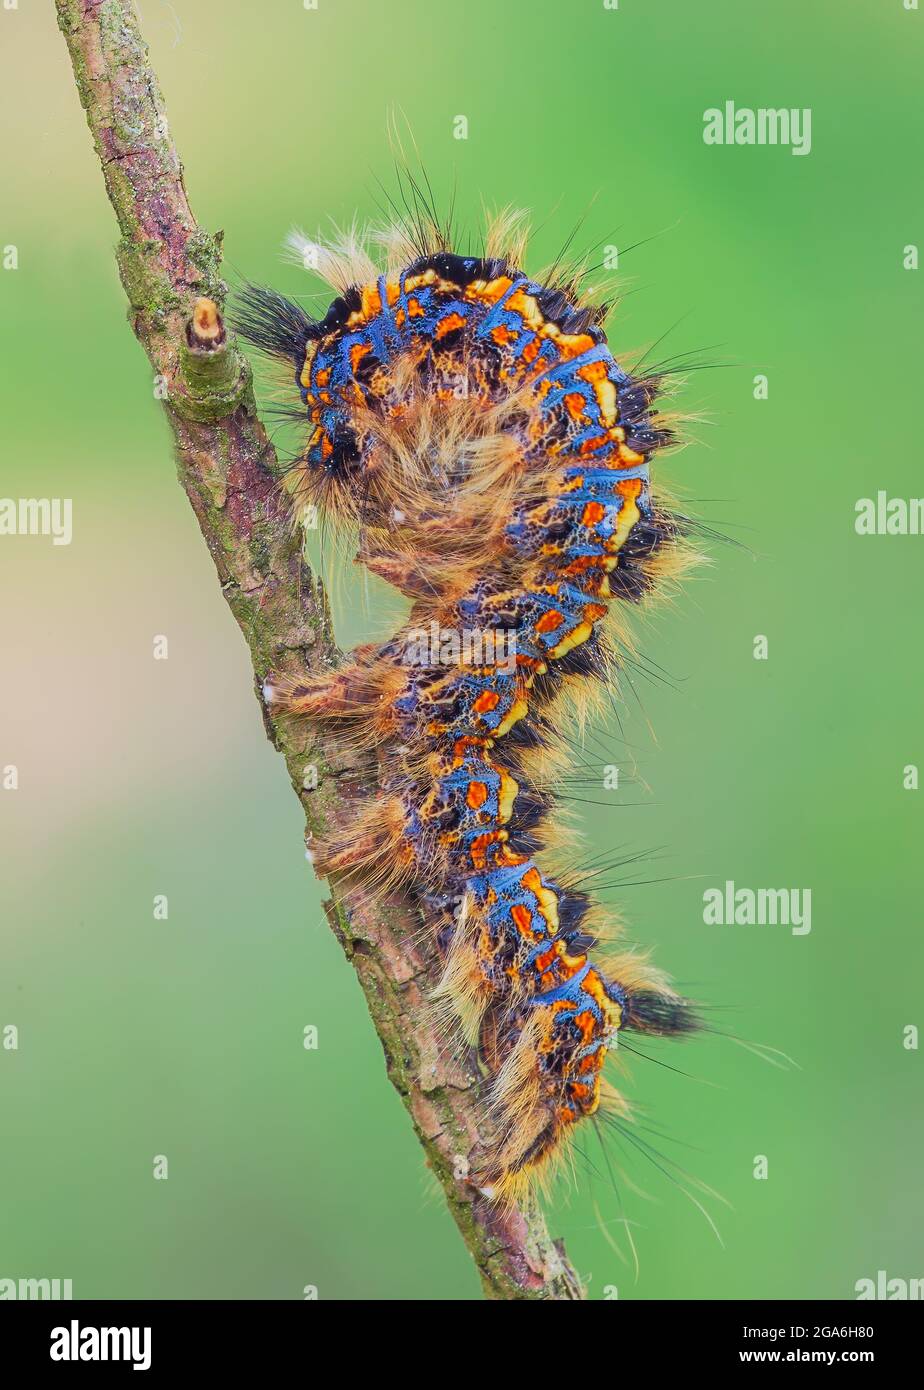 Colorful caterpillar of Canthea coenobita in a curvy pose Stock Photo